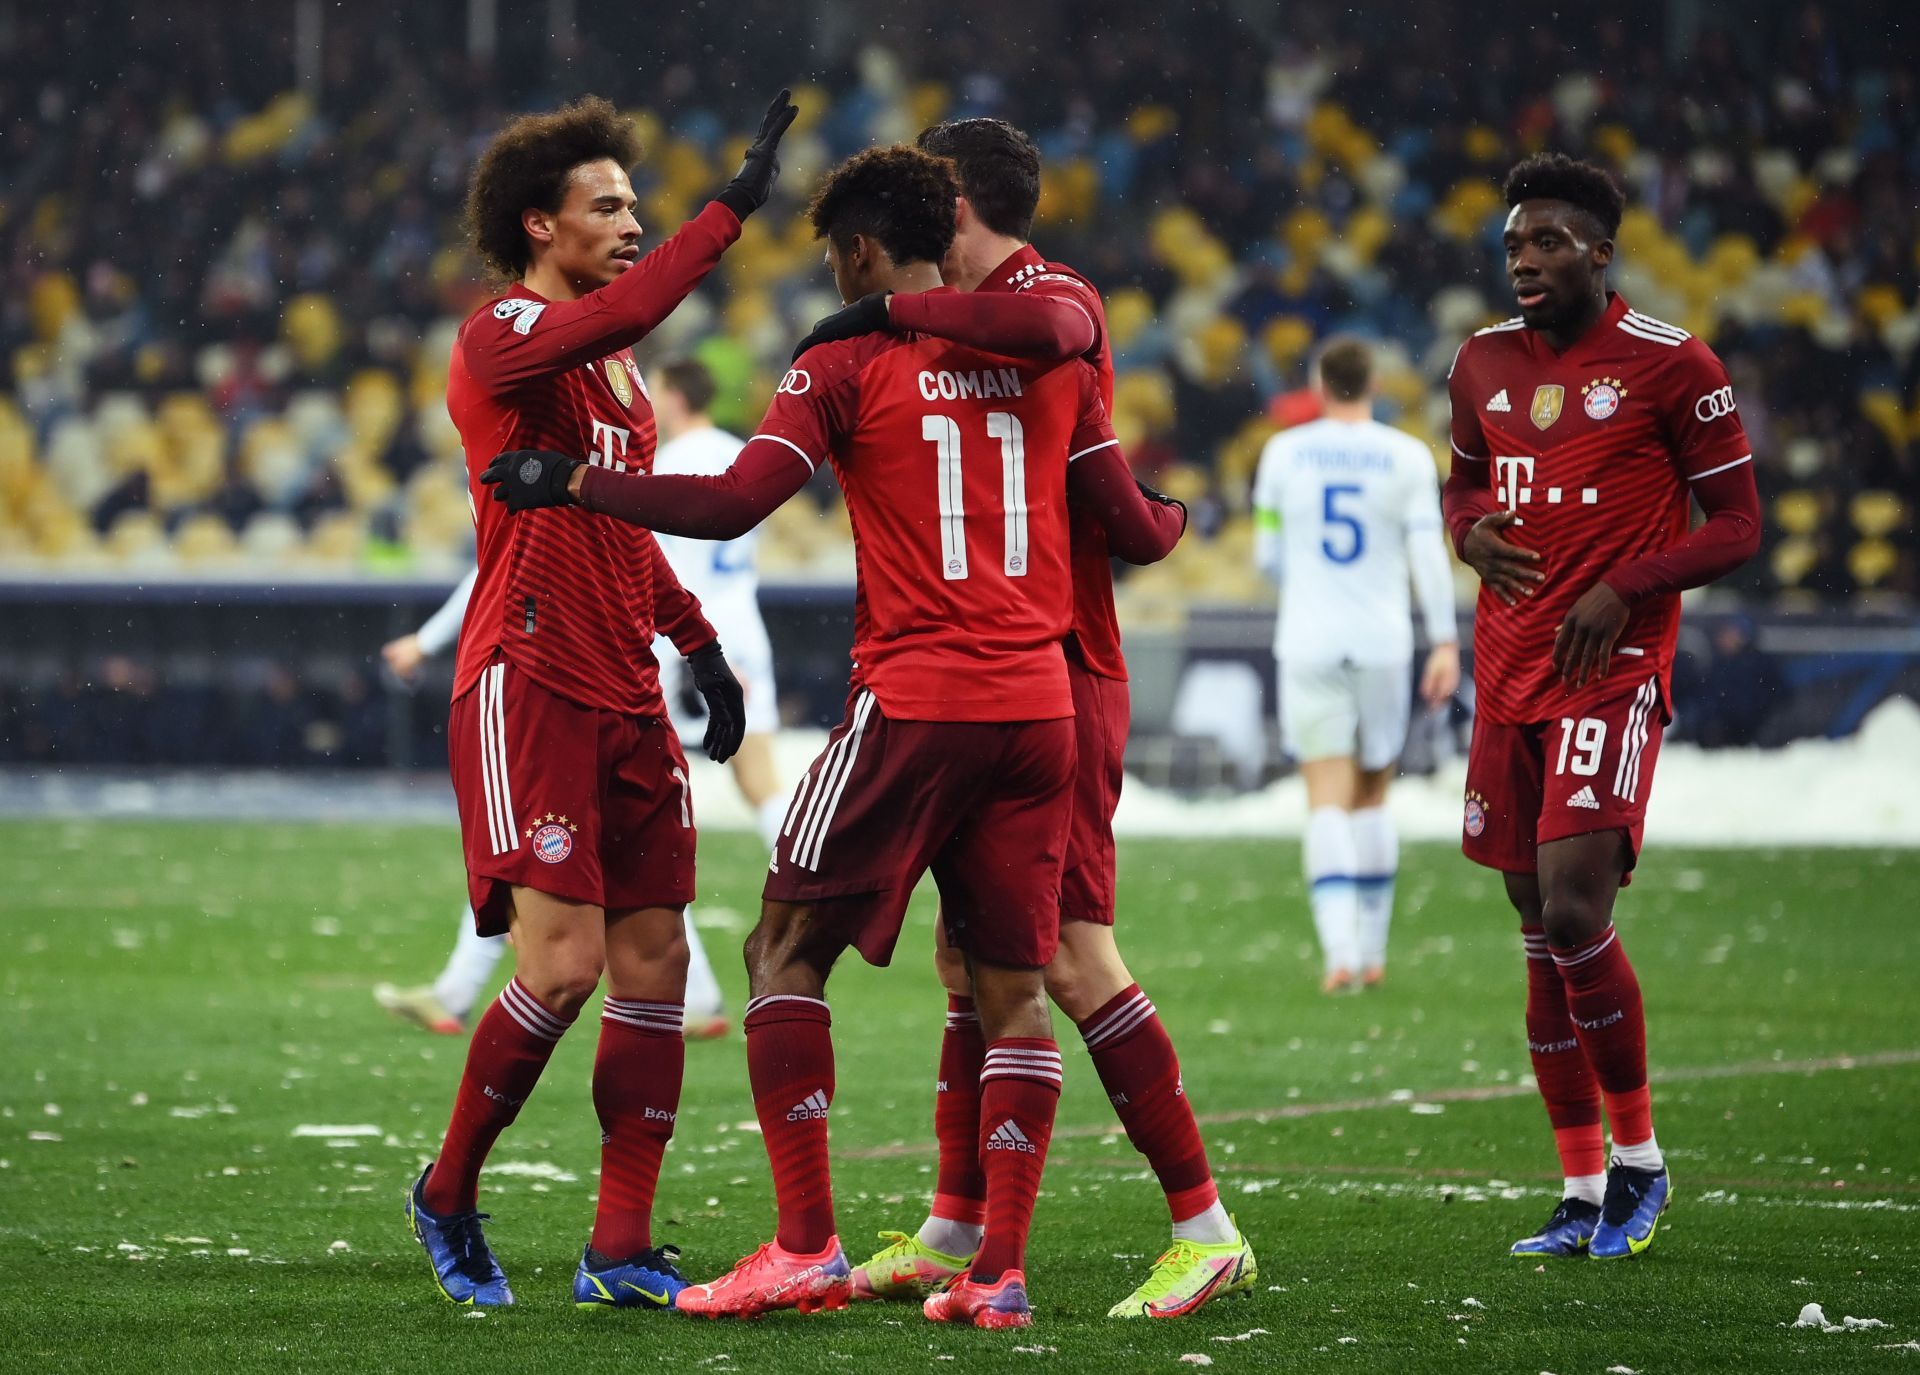 Bayern Munich are through to the 2021-22 Champions League knockouts.